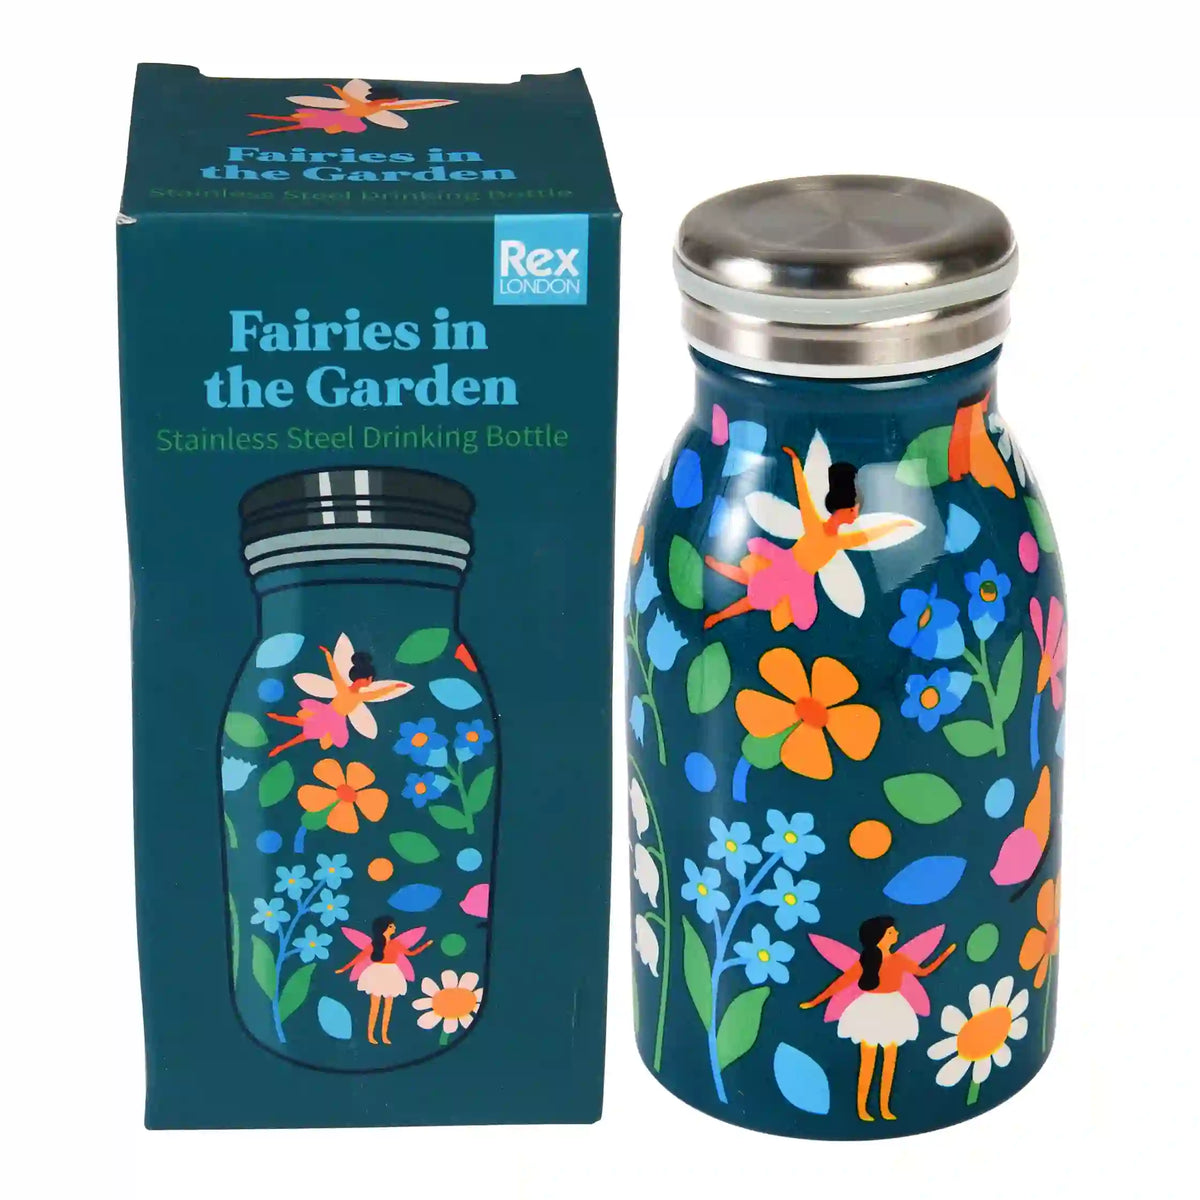 Buy Fairies in the Garden water bottle in Southend at Under the Sun shop